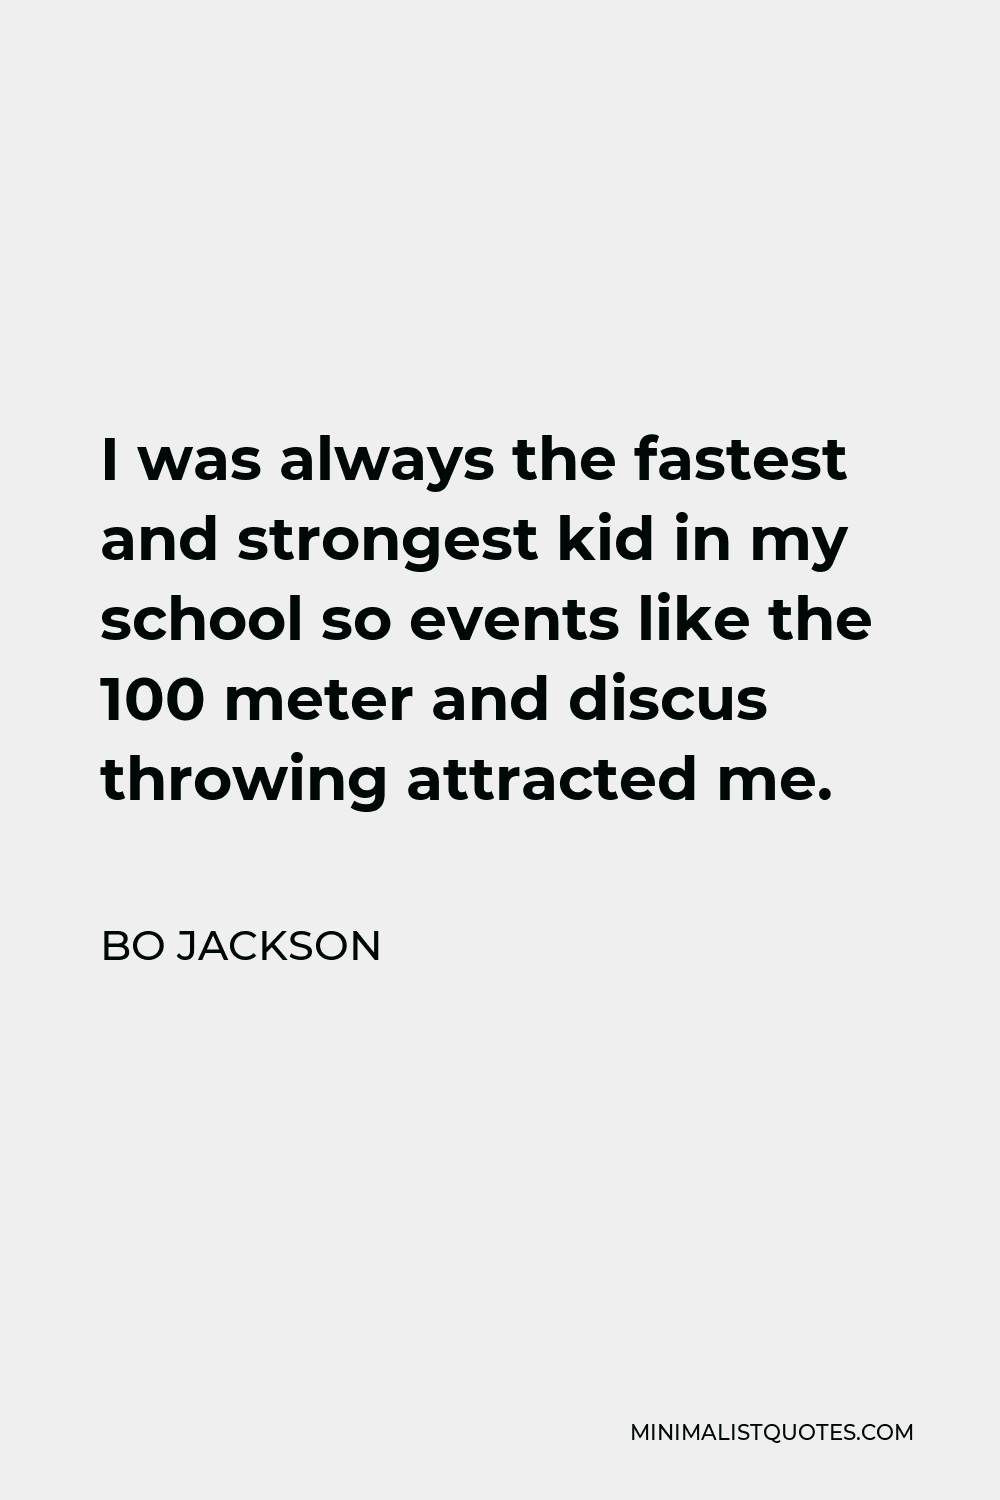 Bo Jackson Quote - I was always the fastest and strongest kid in my school so events like the 100 meter and discus throwing attracted me.